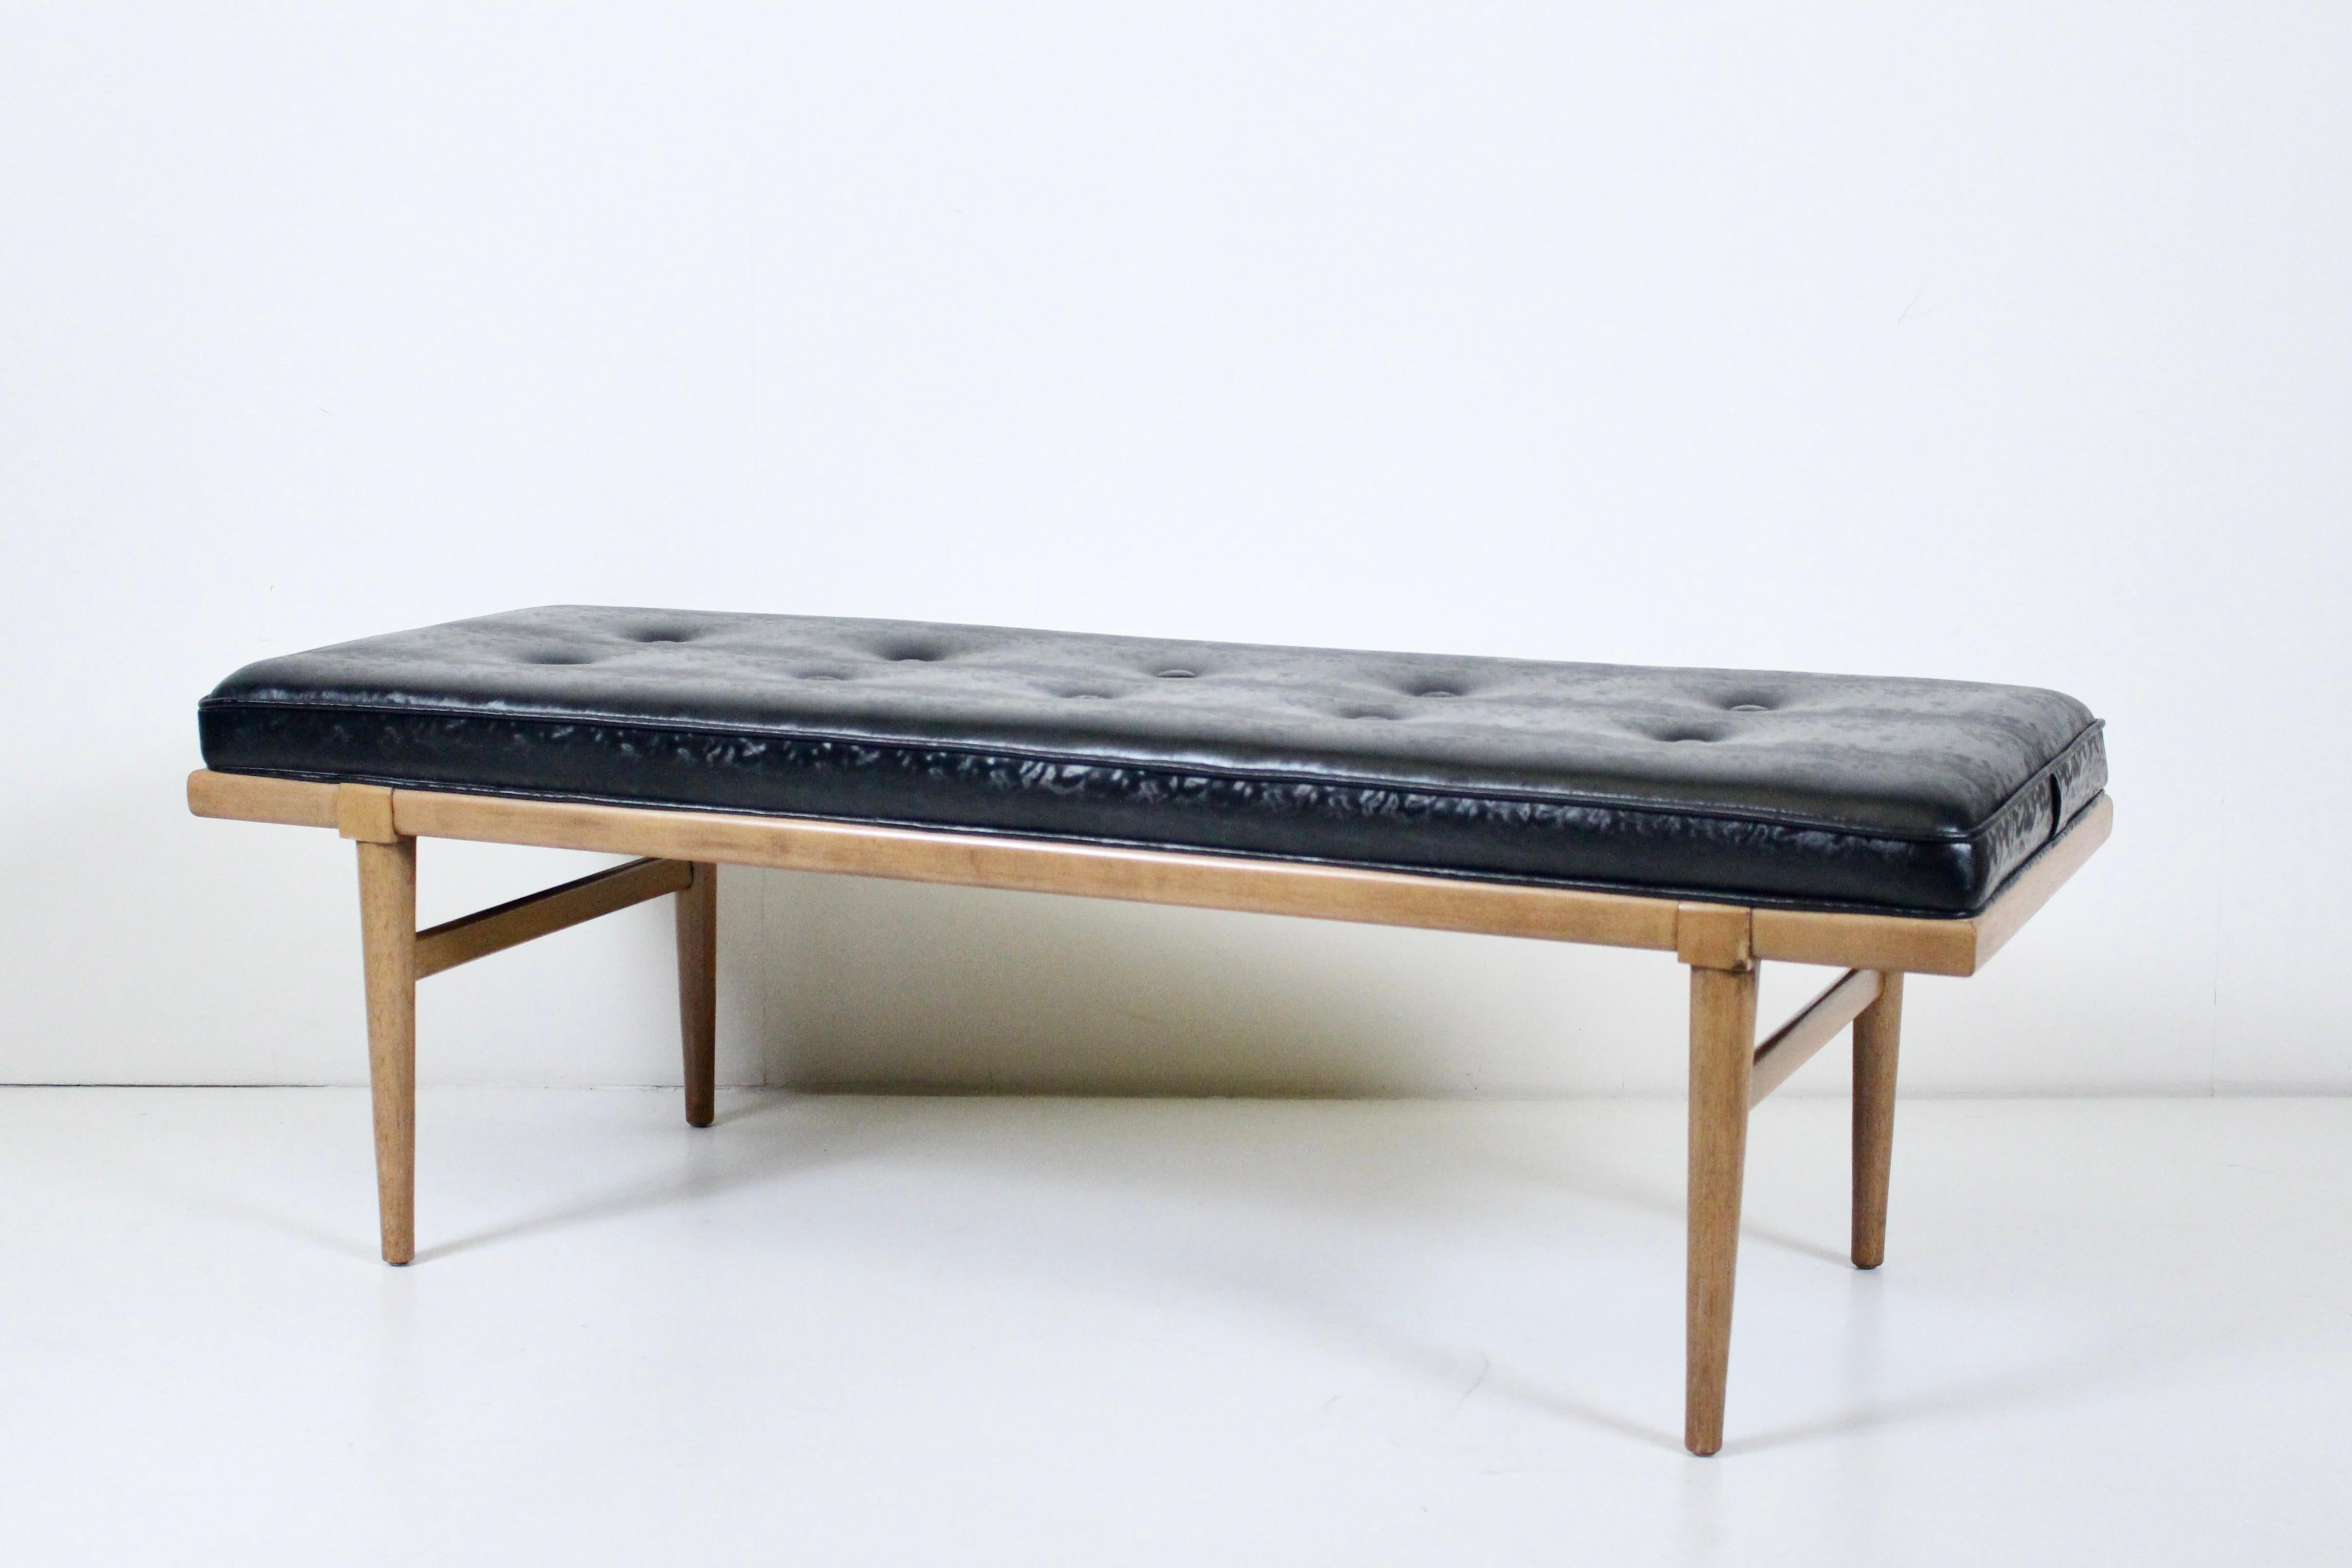 T. H. Robsjohn-Gibbings Bleached Mahogany Button Tufted Bench, 1950's For Sale 1